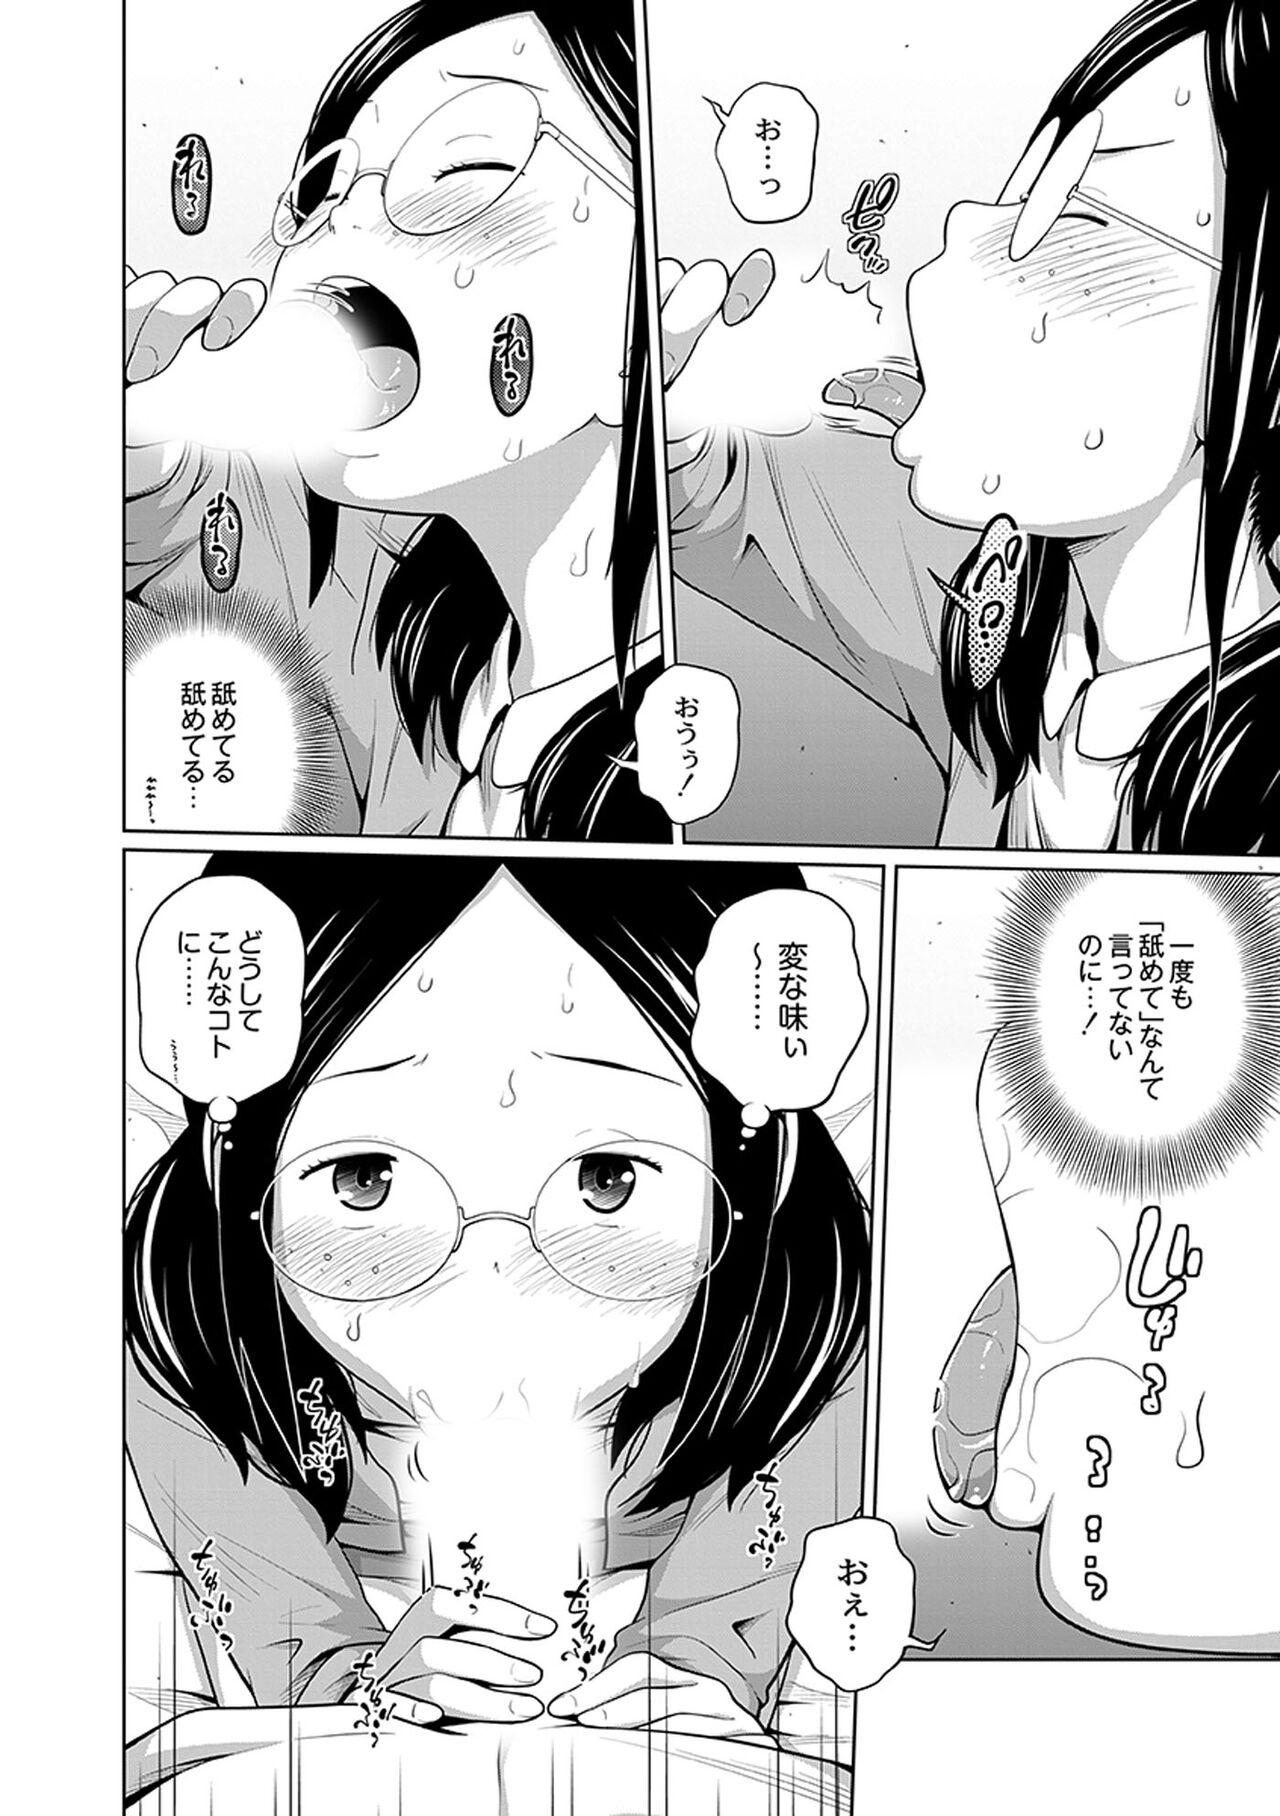 Mexico Ane Megane - spectacled sister Amateurs - Page 10